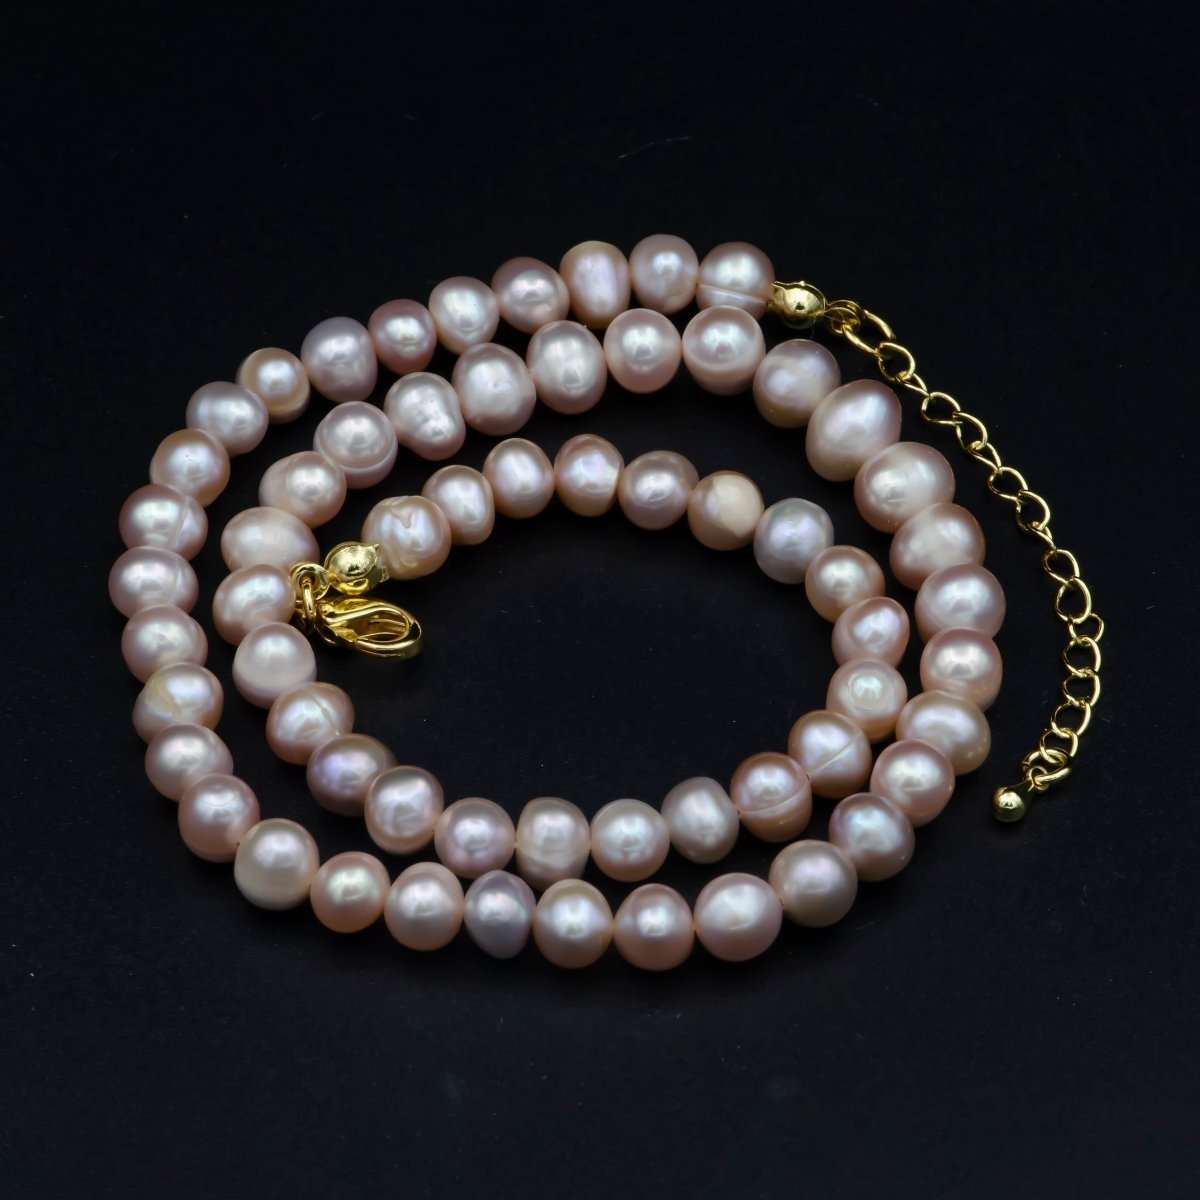 OS Freshwater Champagne Bridal Pearl Necklace - Chockers Jackie O Pearl Necklace - Hand Strung Genuine Pearl Necklace WA-550 - DLUXCA